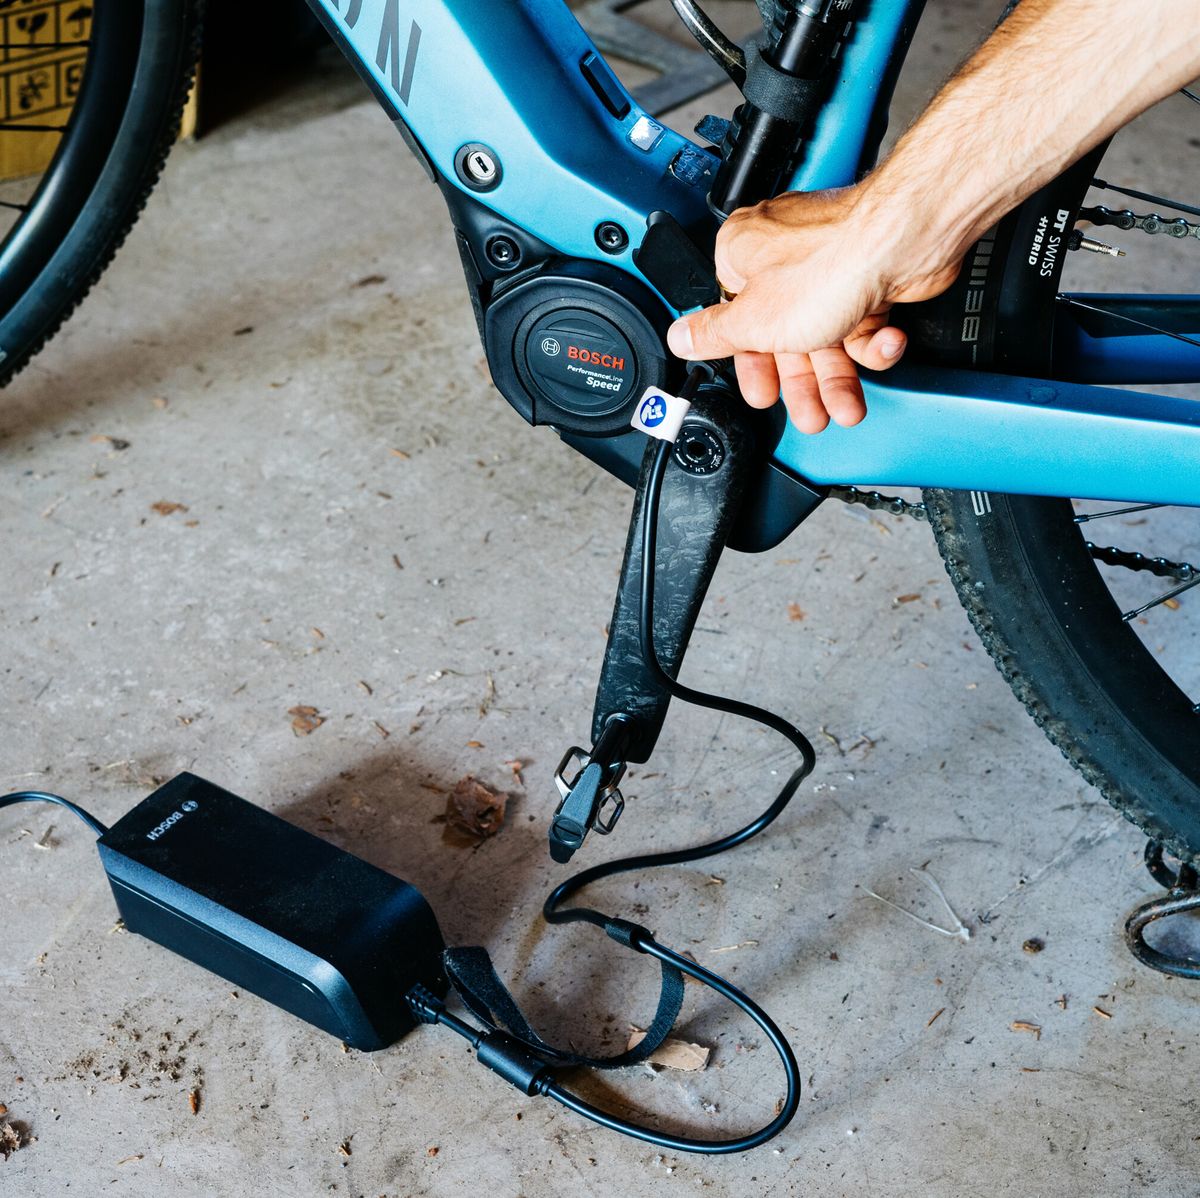 How to Charge an E-Bike: Guide to Safely Charging an Electric Bike